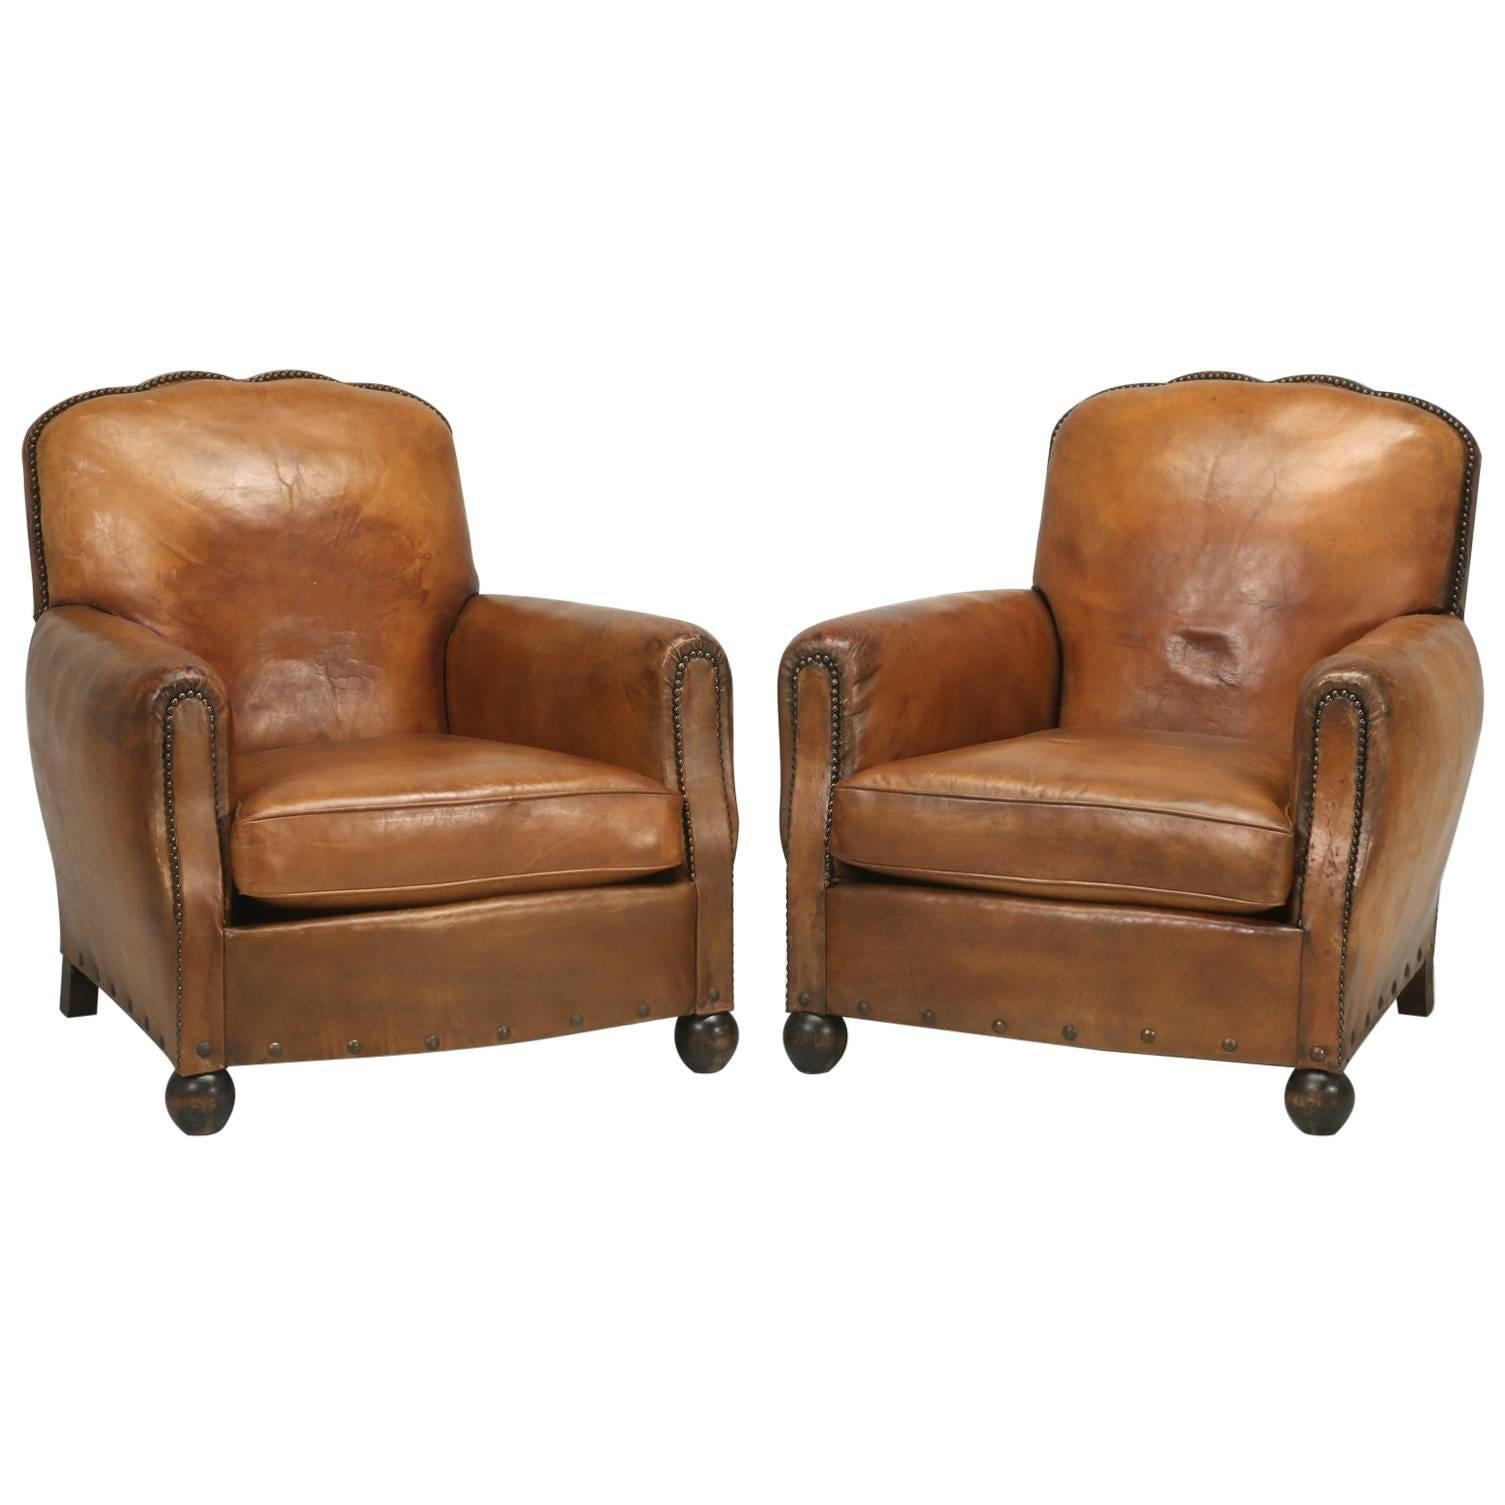 French Art Deco Original Leather Club Chairs